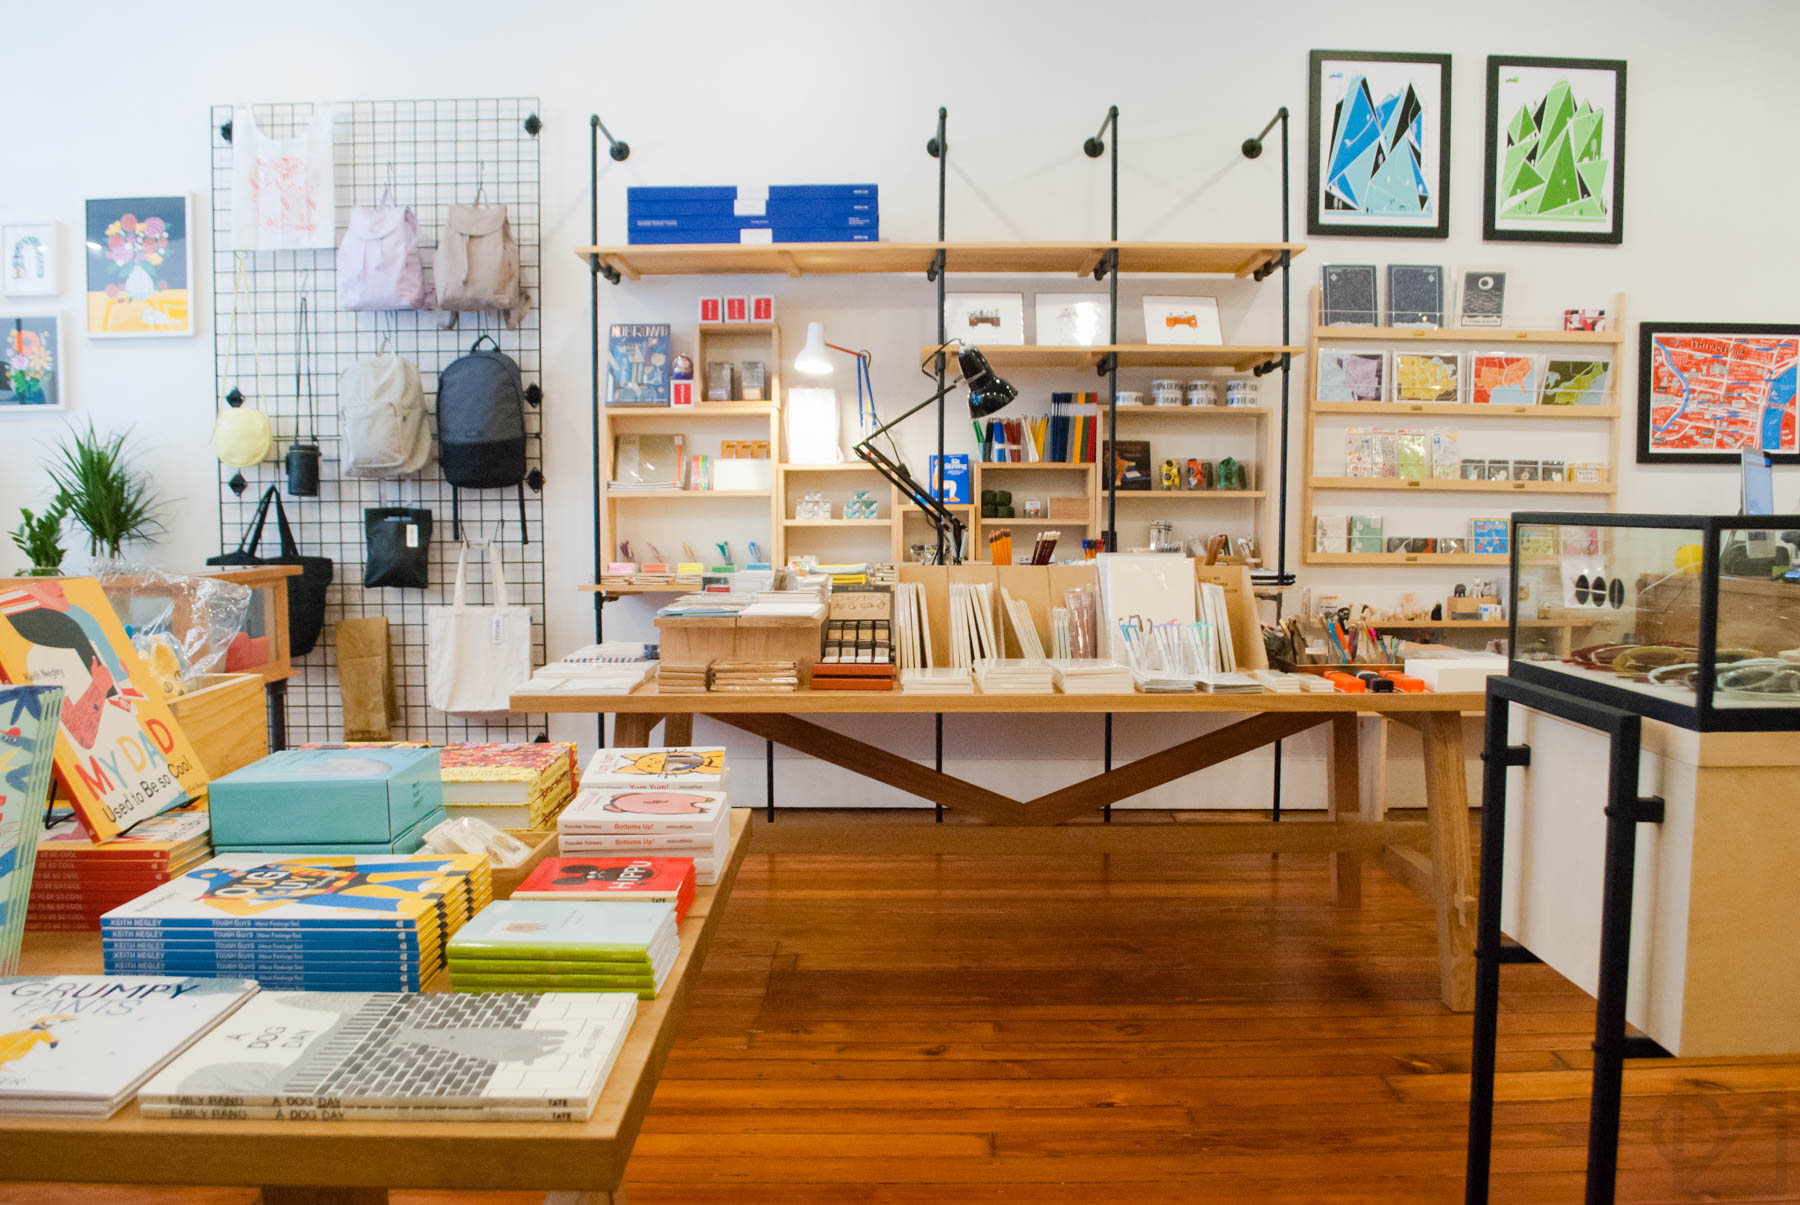 We've focused our stationery alongside an entire half of the shop now